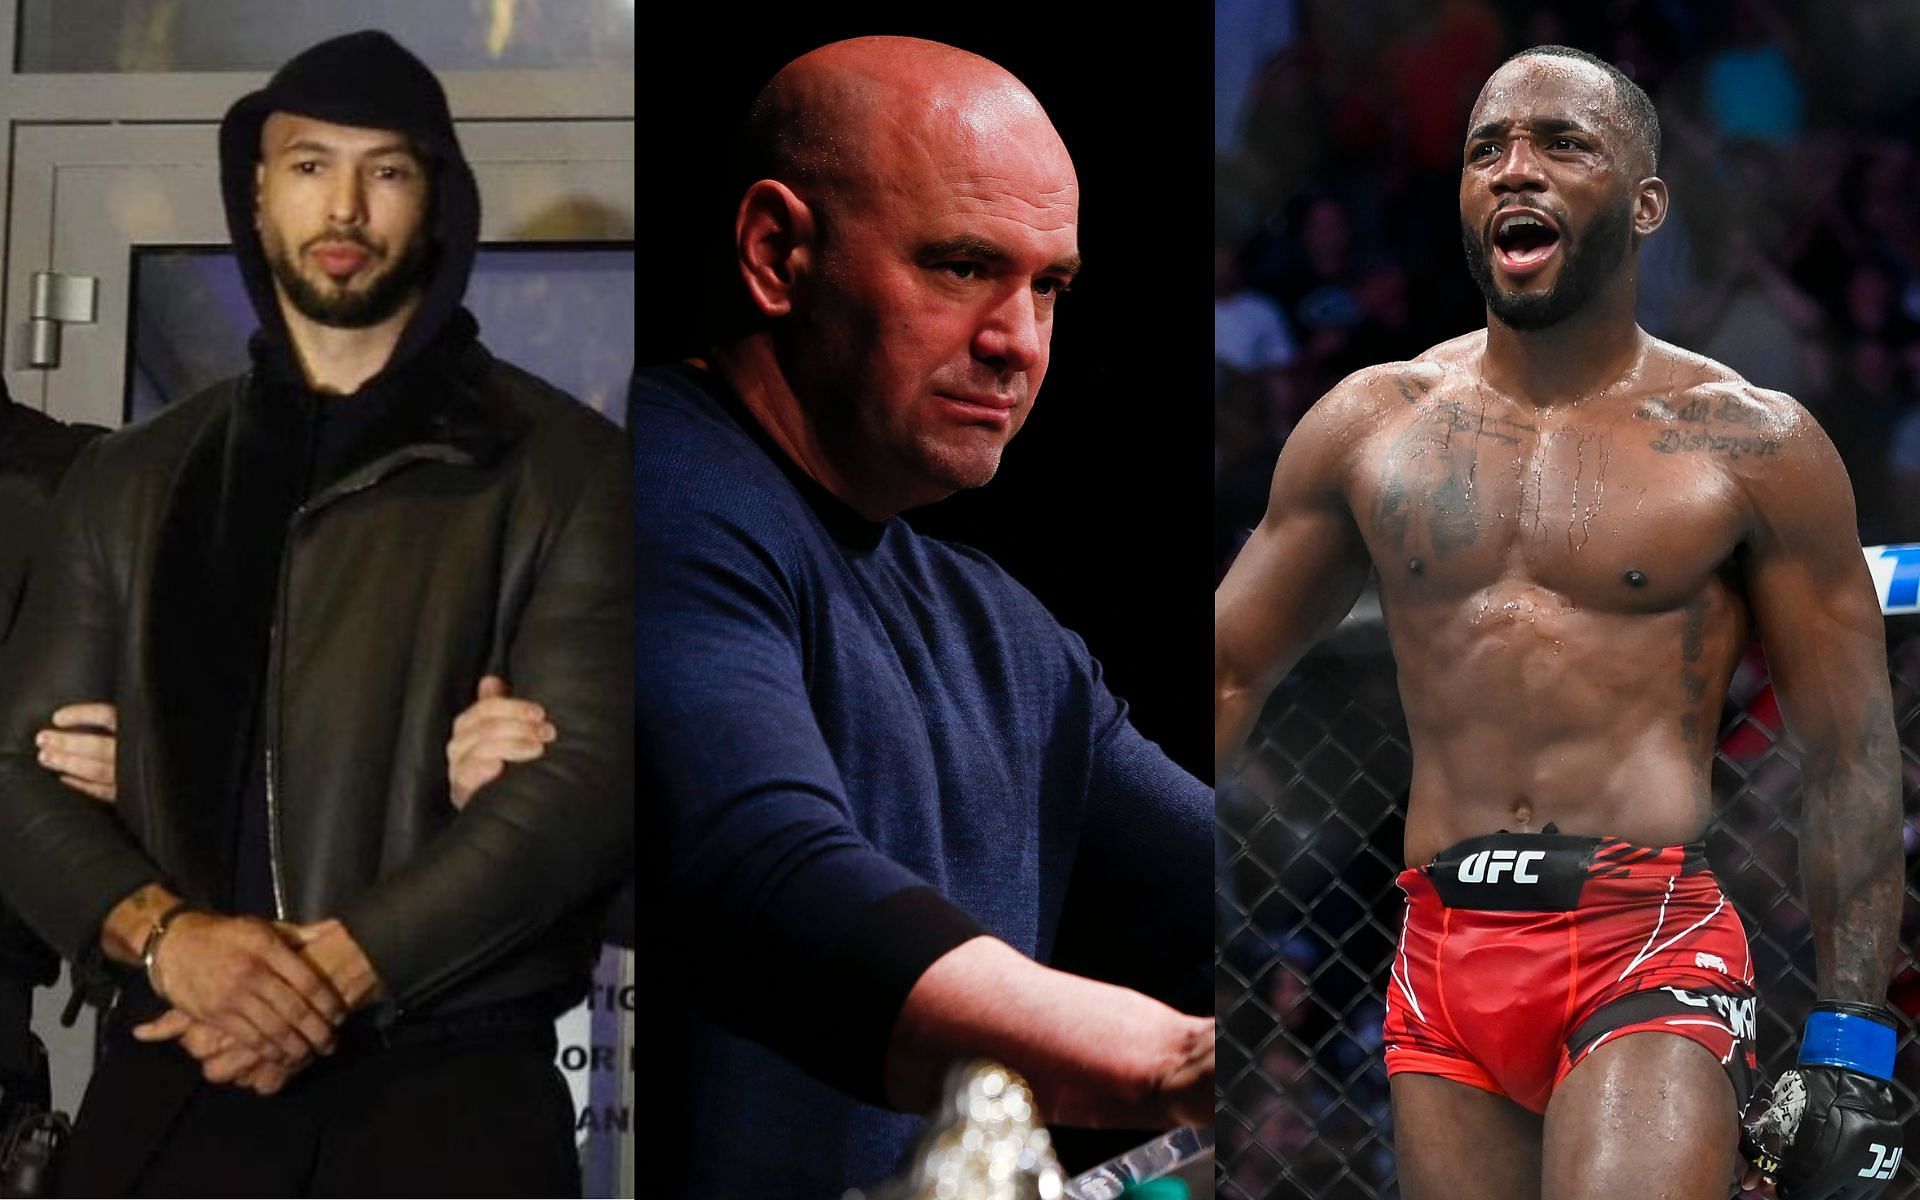 Andrew Tate (left), Dana White (center), and Leon Edwards (right). [Images courtesy: left image from Twitter @Dexerto and the rest from Getty Images]